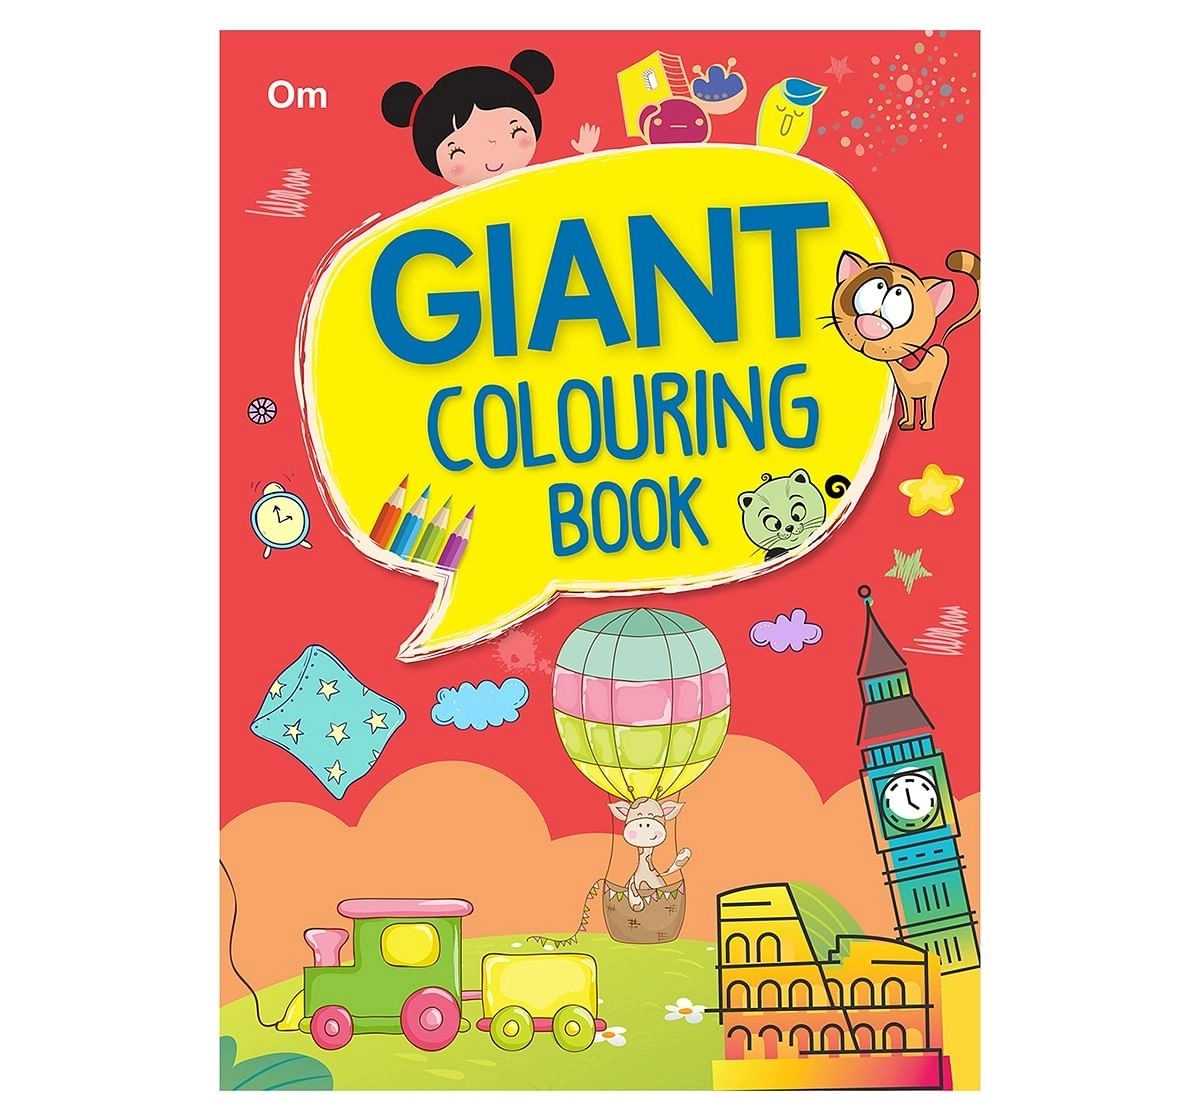 Colouring Book : Giant Colouring Book For Kids, 368 Pages Book By Om Books Editorial Team, Paperback